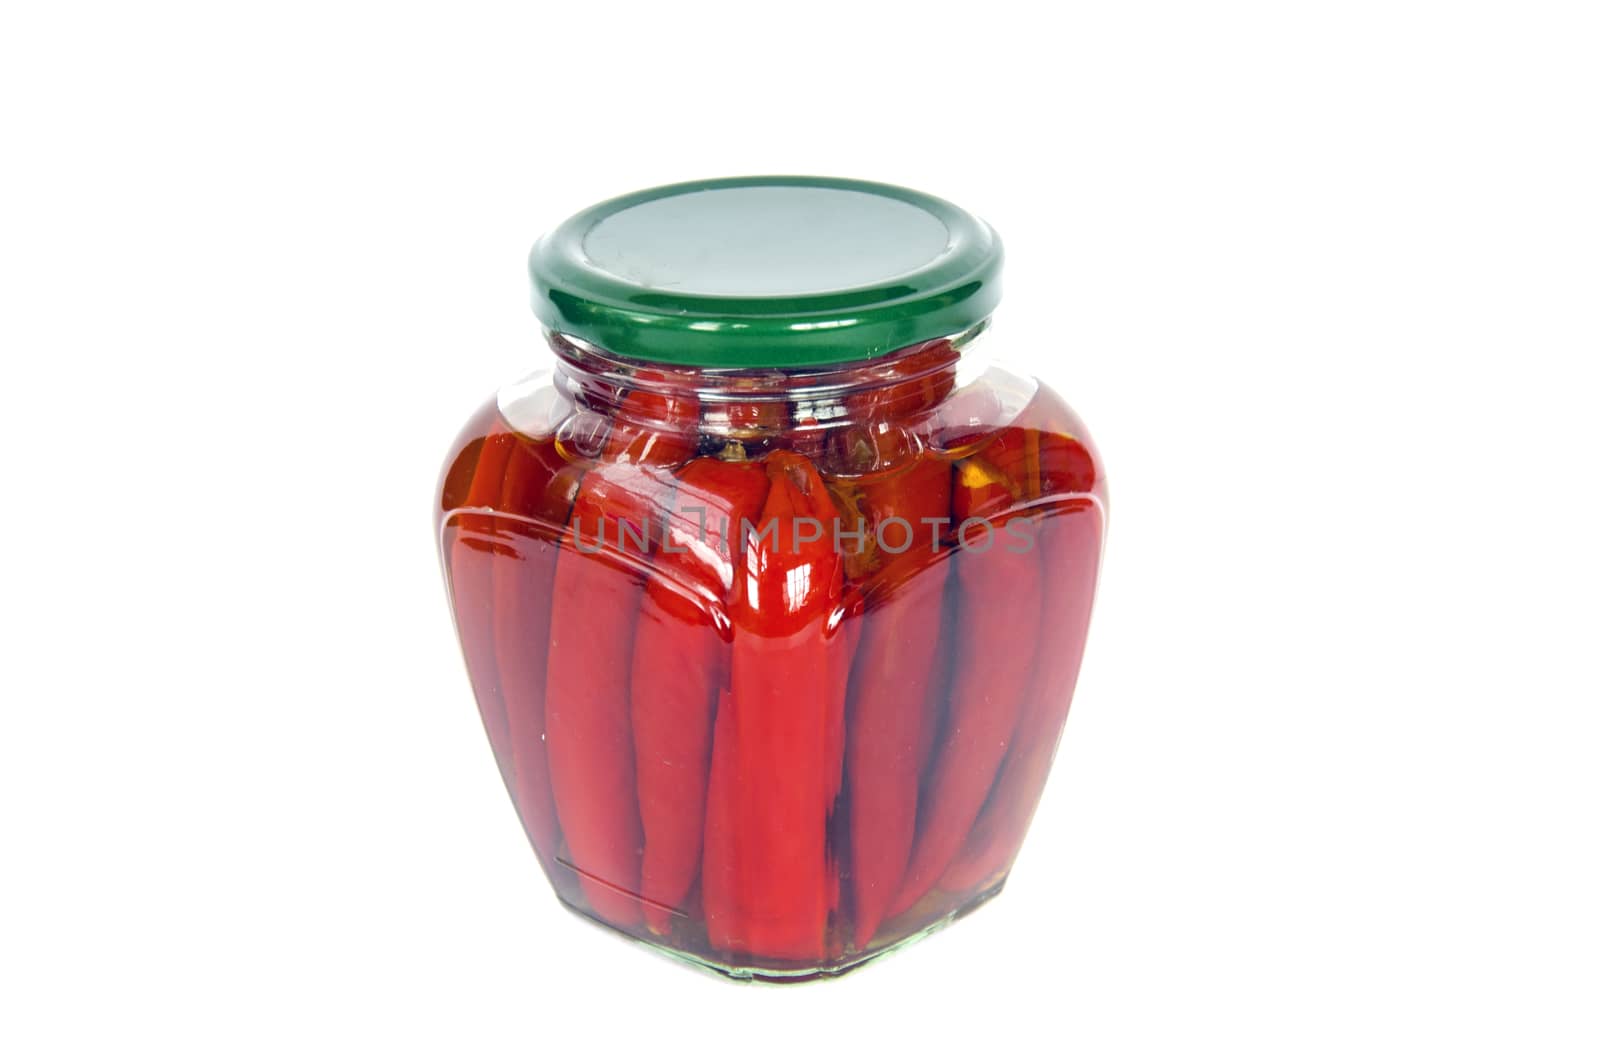 ecological red hot chilli pepper paprika preserved canned in glass pot isolated on white